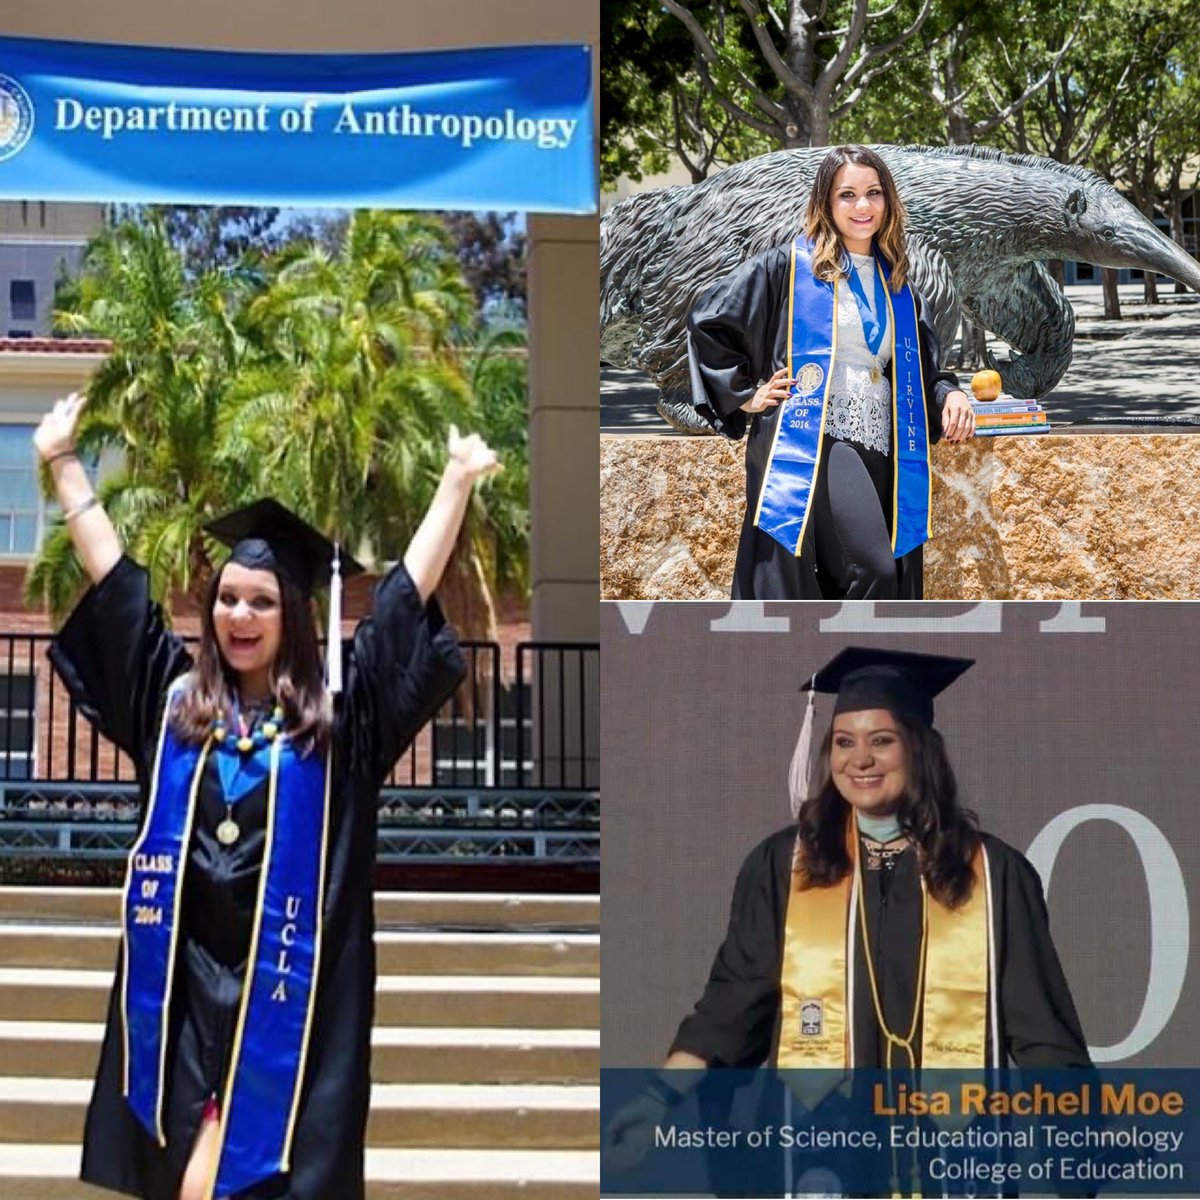 June 14th has marked the anniversary of three milestones that led me on my path of becoming Miss Moe… UCLA ‘14, UCI ‘16, CSUF ‘20…and the best is yet to come! 
 
Keep striving, keep pursuing, always know that there are never time limits to making your dreams come true ✨ 🎓